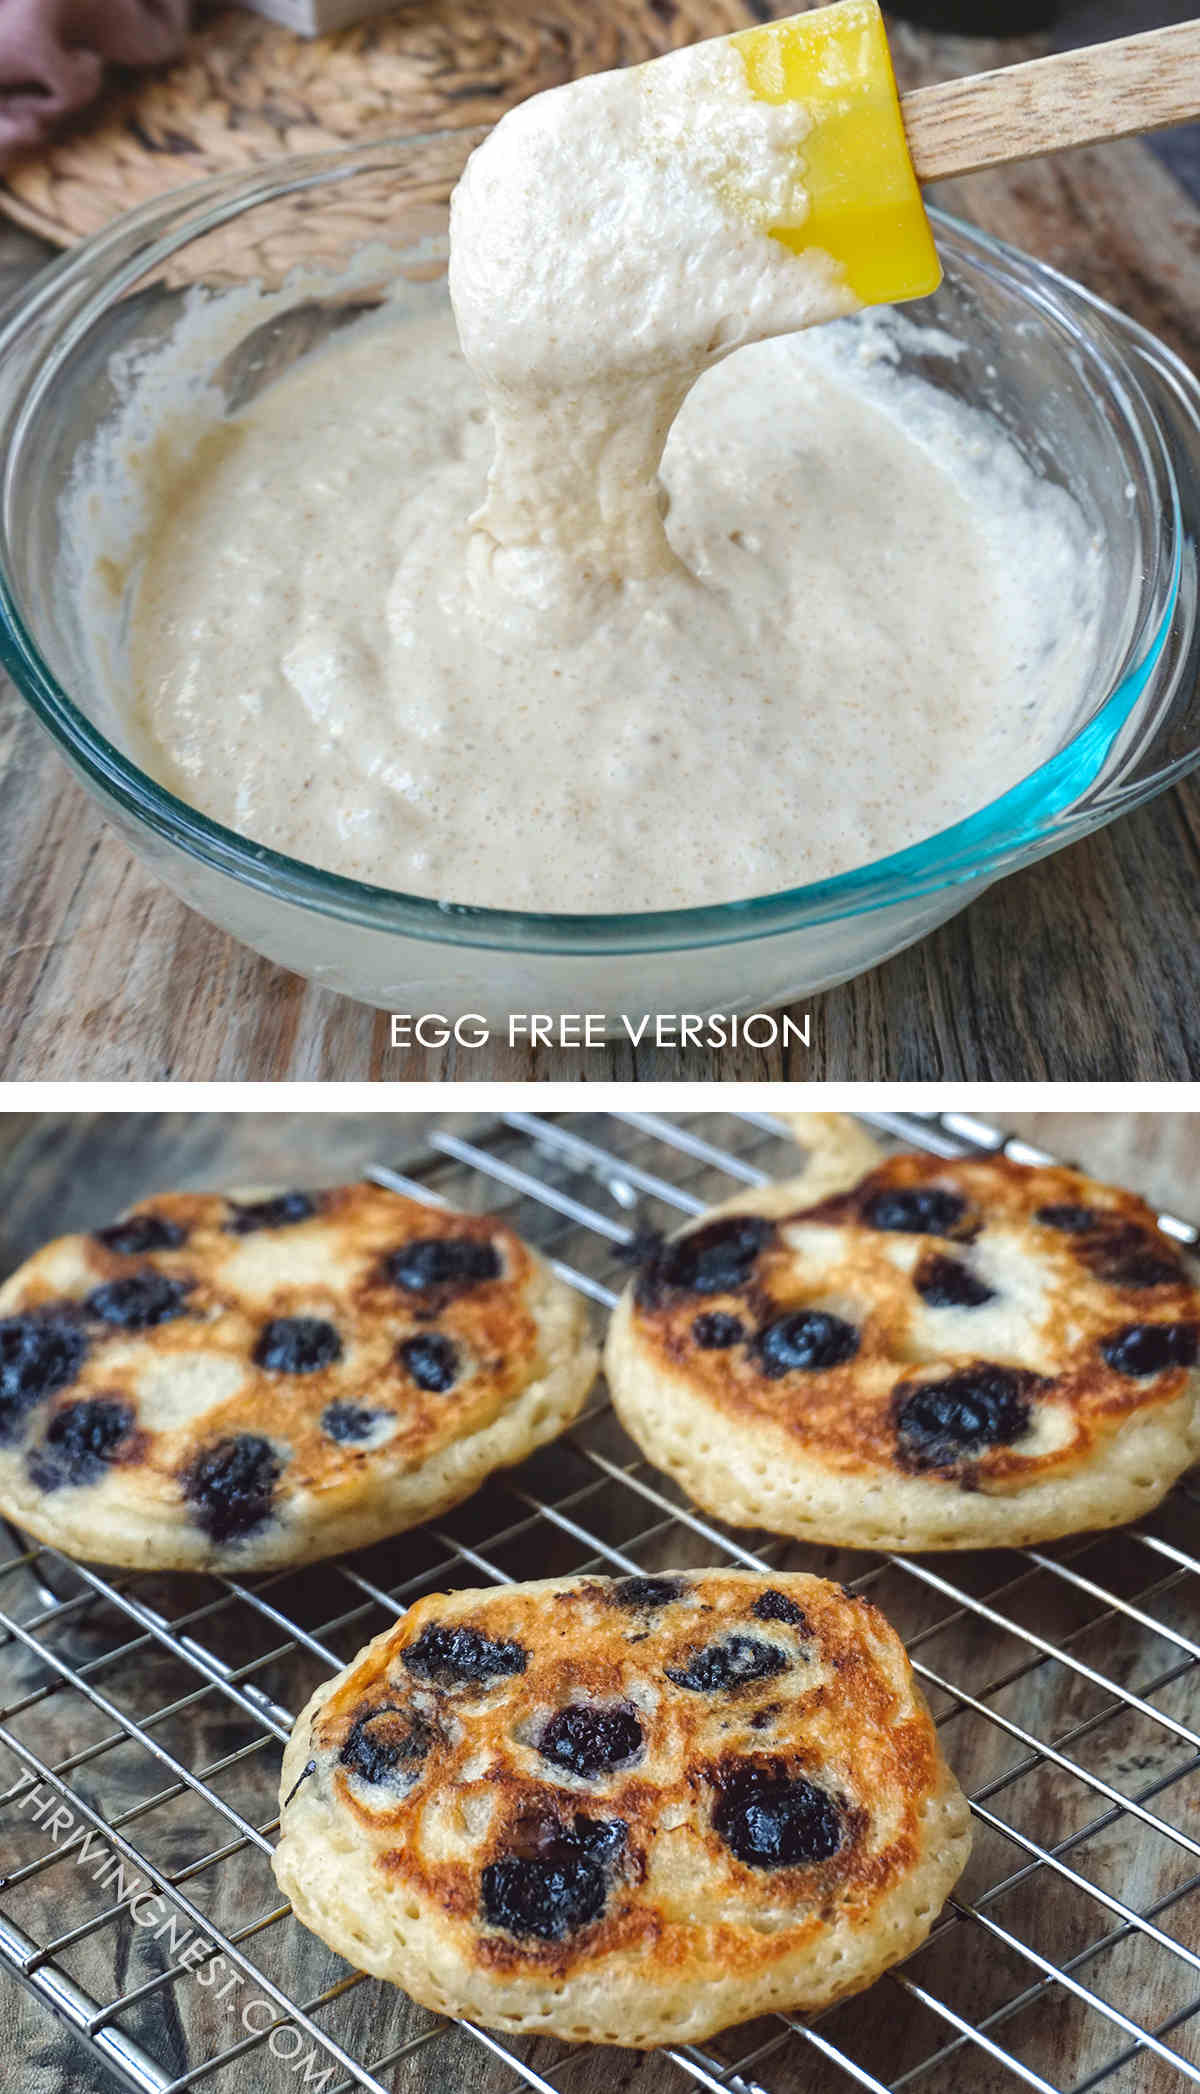 Process shots showing the right consistency of egg free pancake batter and cooked egg free baby blueberry pancakes cooling on a rack.